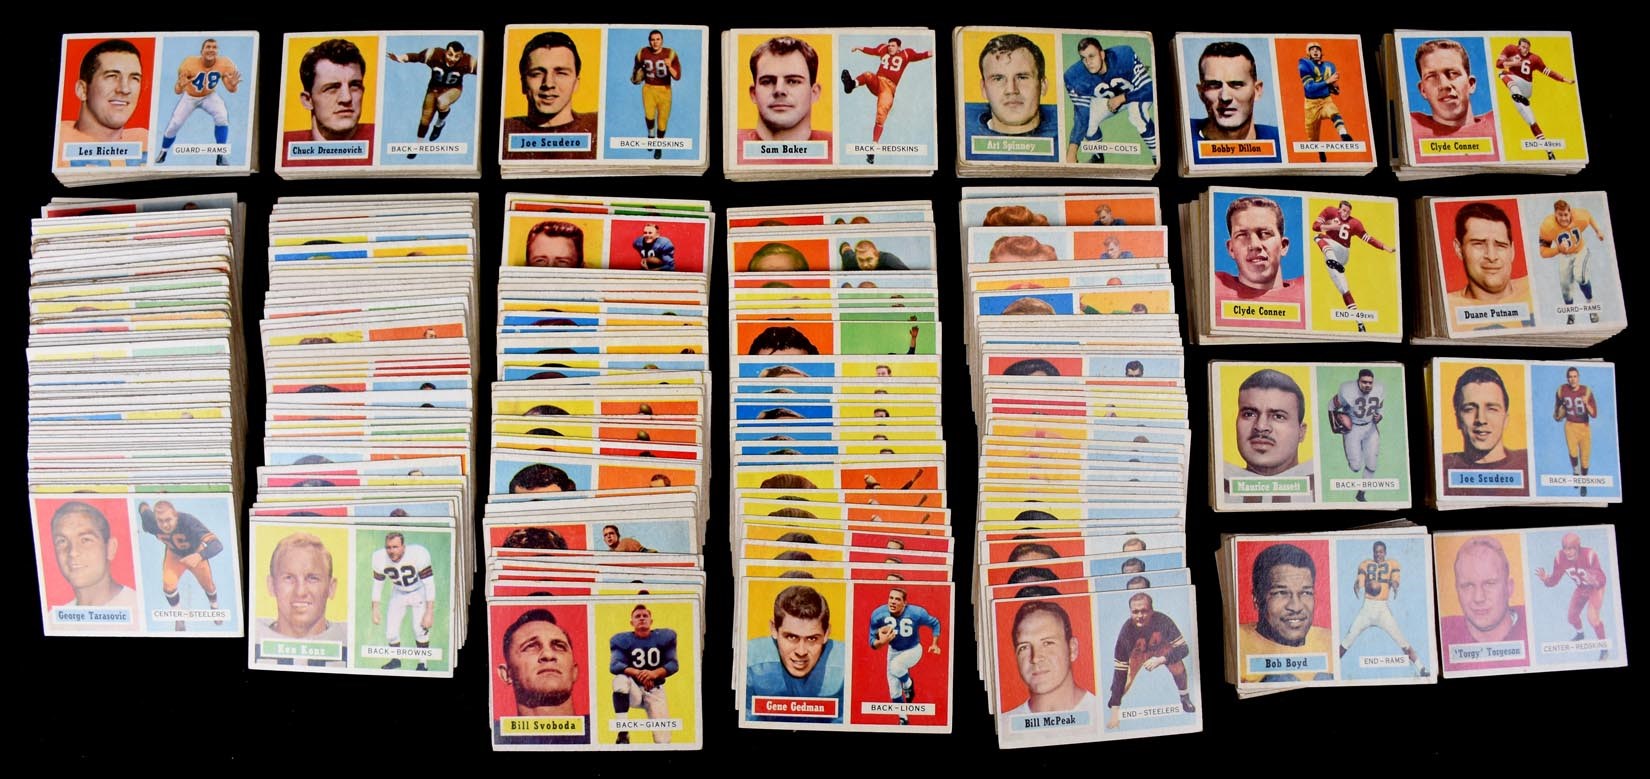 - 1957 Topps Football Card Collection (1,250+)